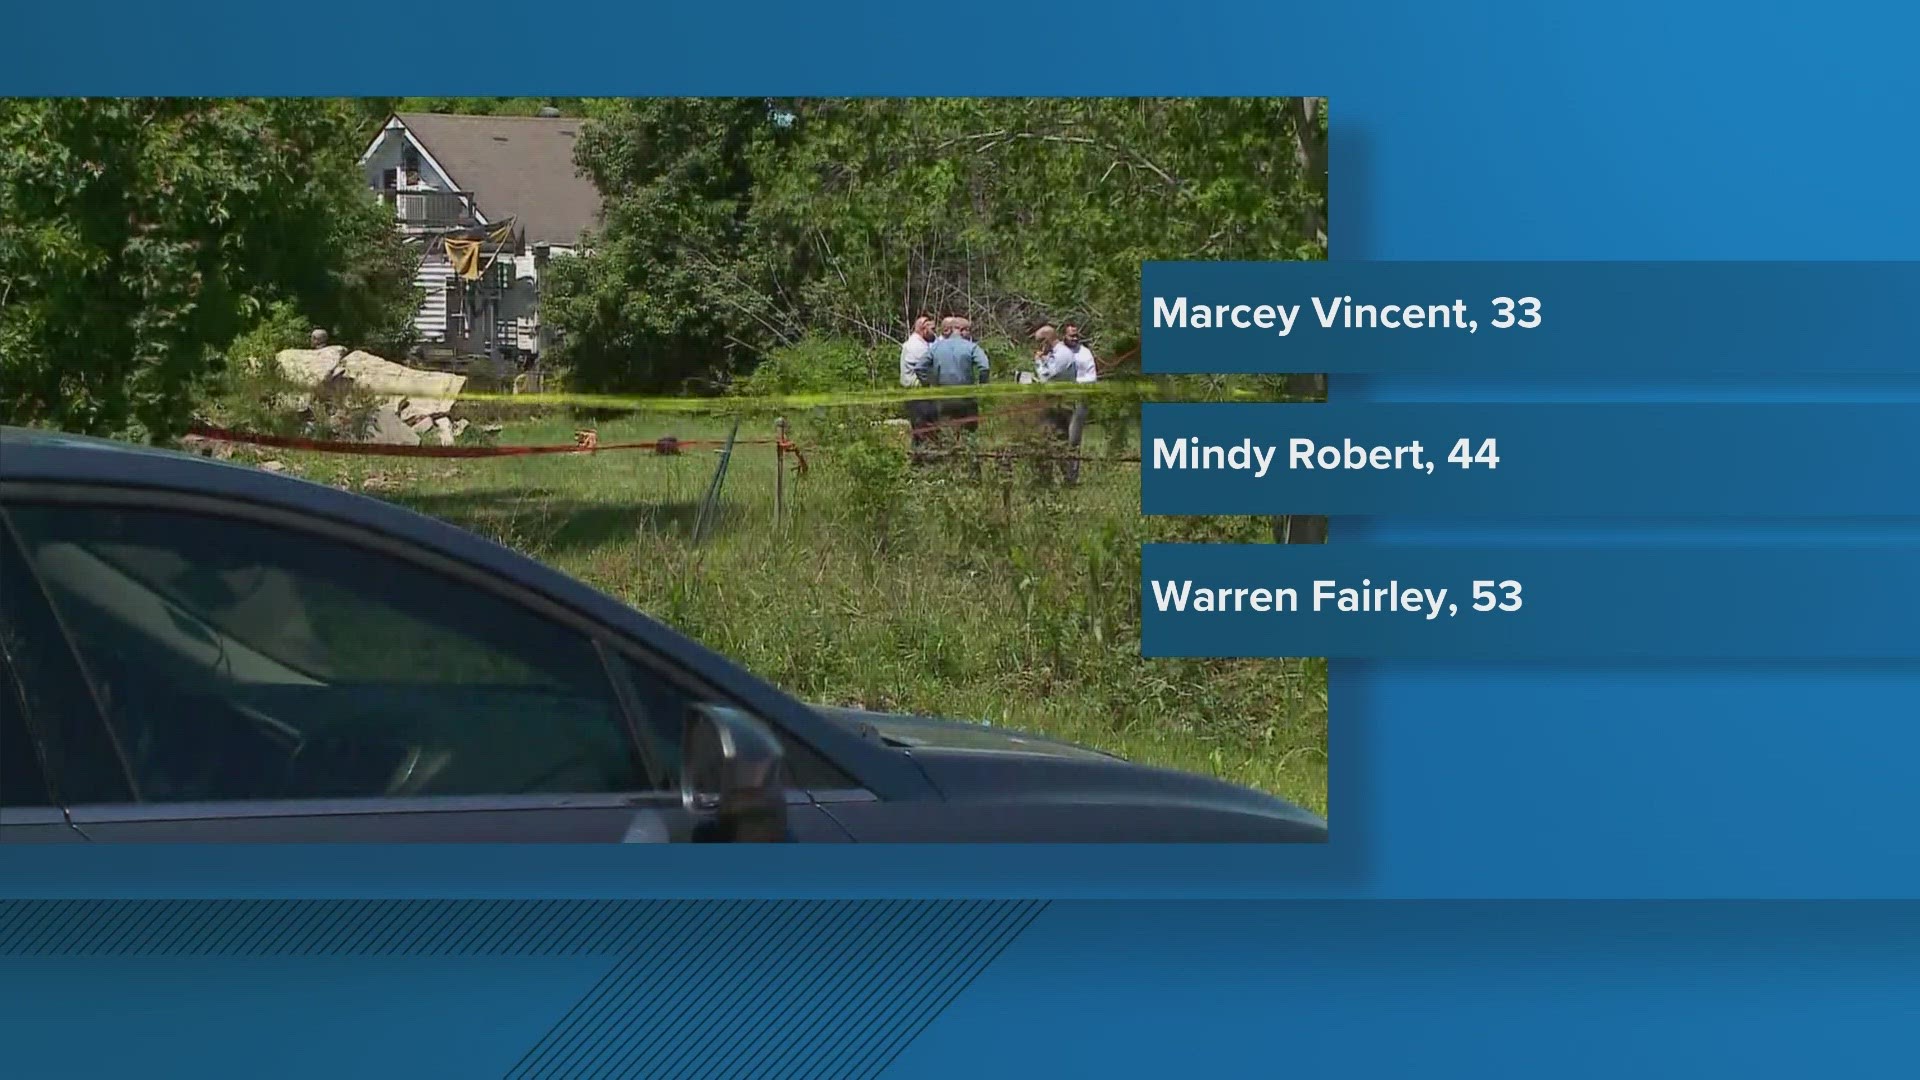 The names of the victims in a triple homicide has been released.